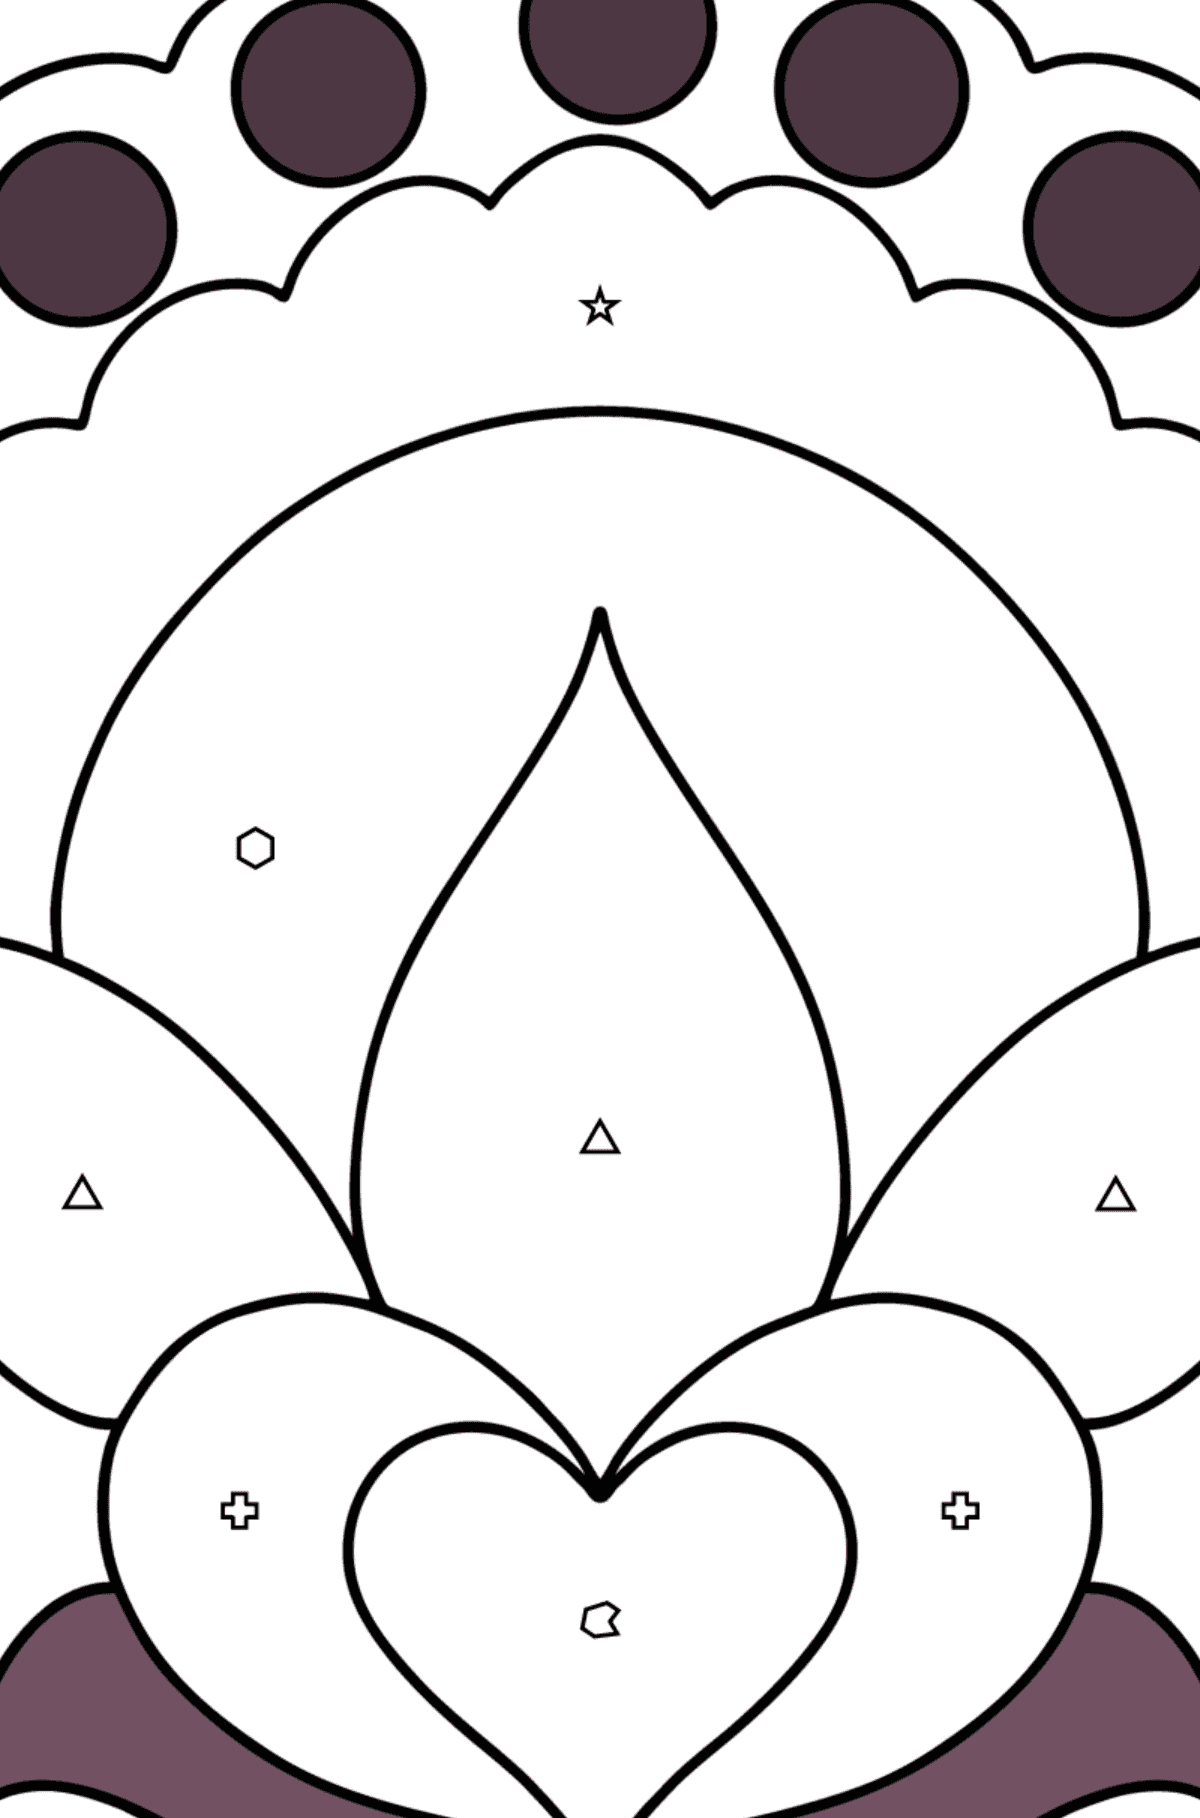 Simple coloring page - Flower Anti stress - Coloring by Geometric Shapes for Kids